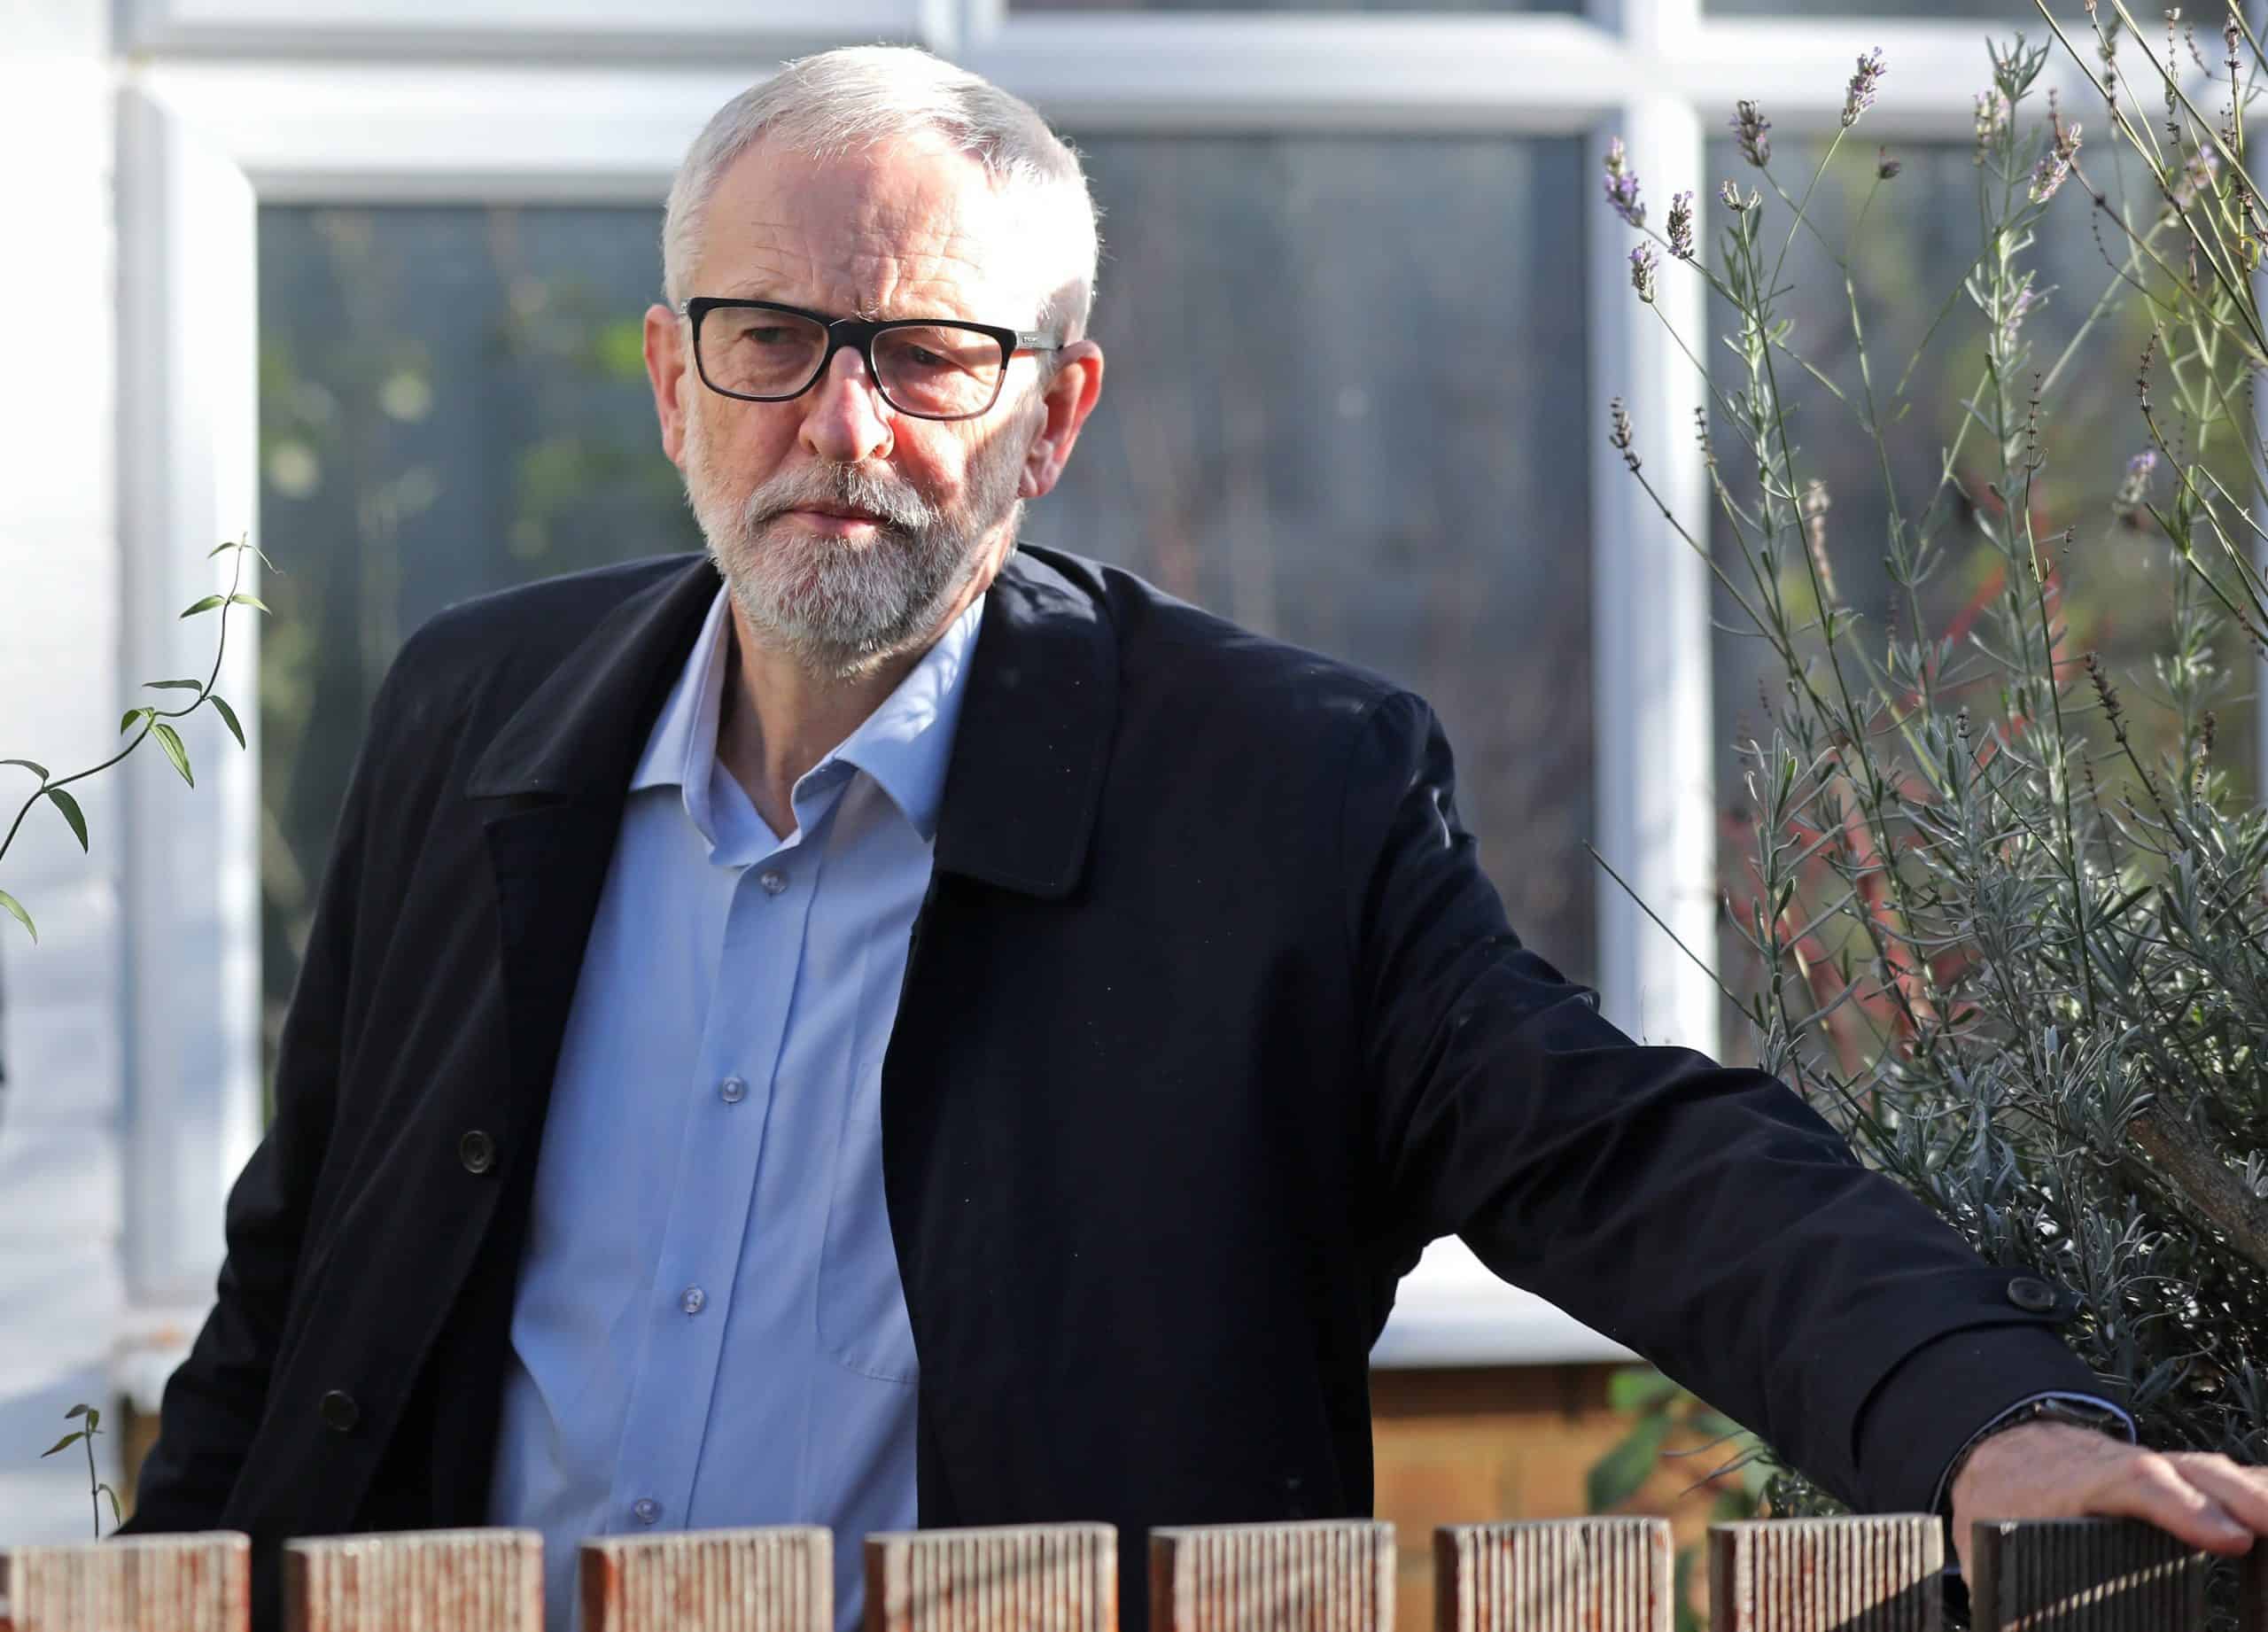 ‘Grotesquely unfair’: Left reacts to Corbyn’s suspension